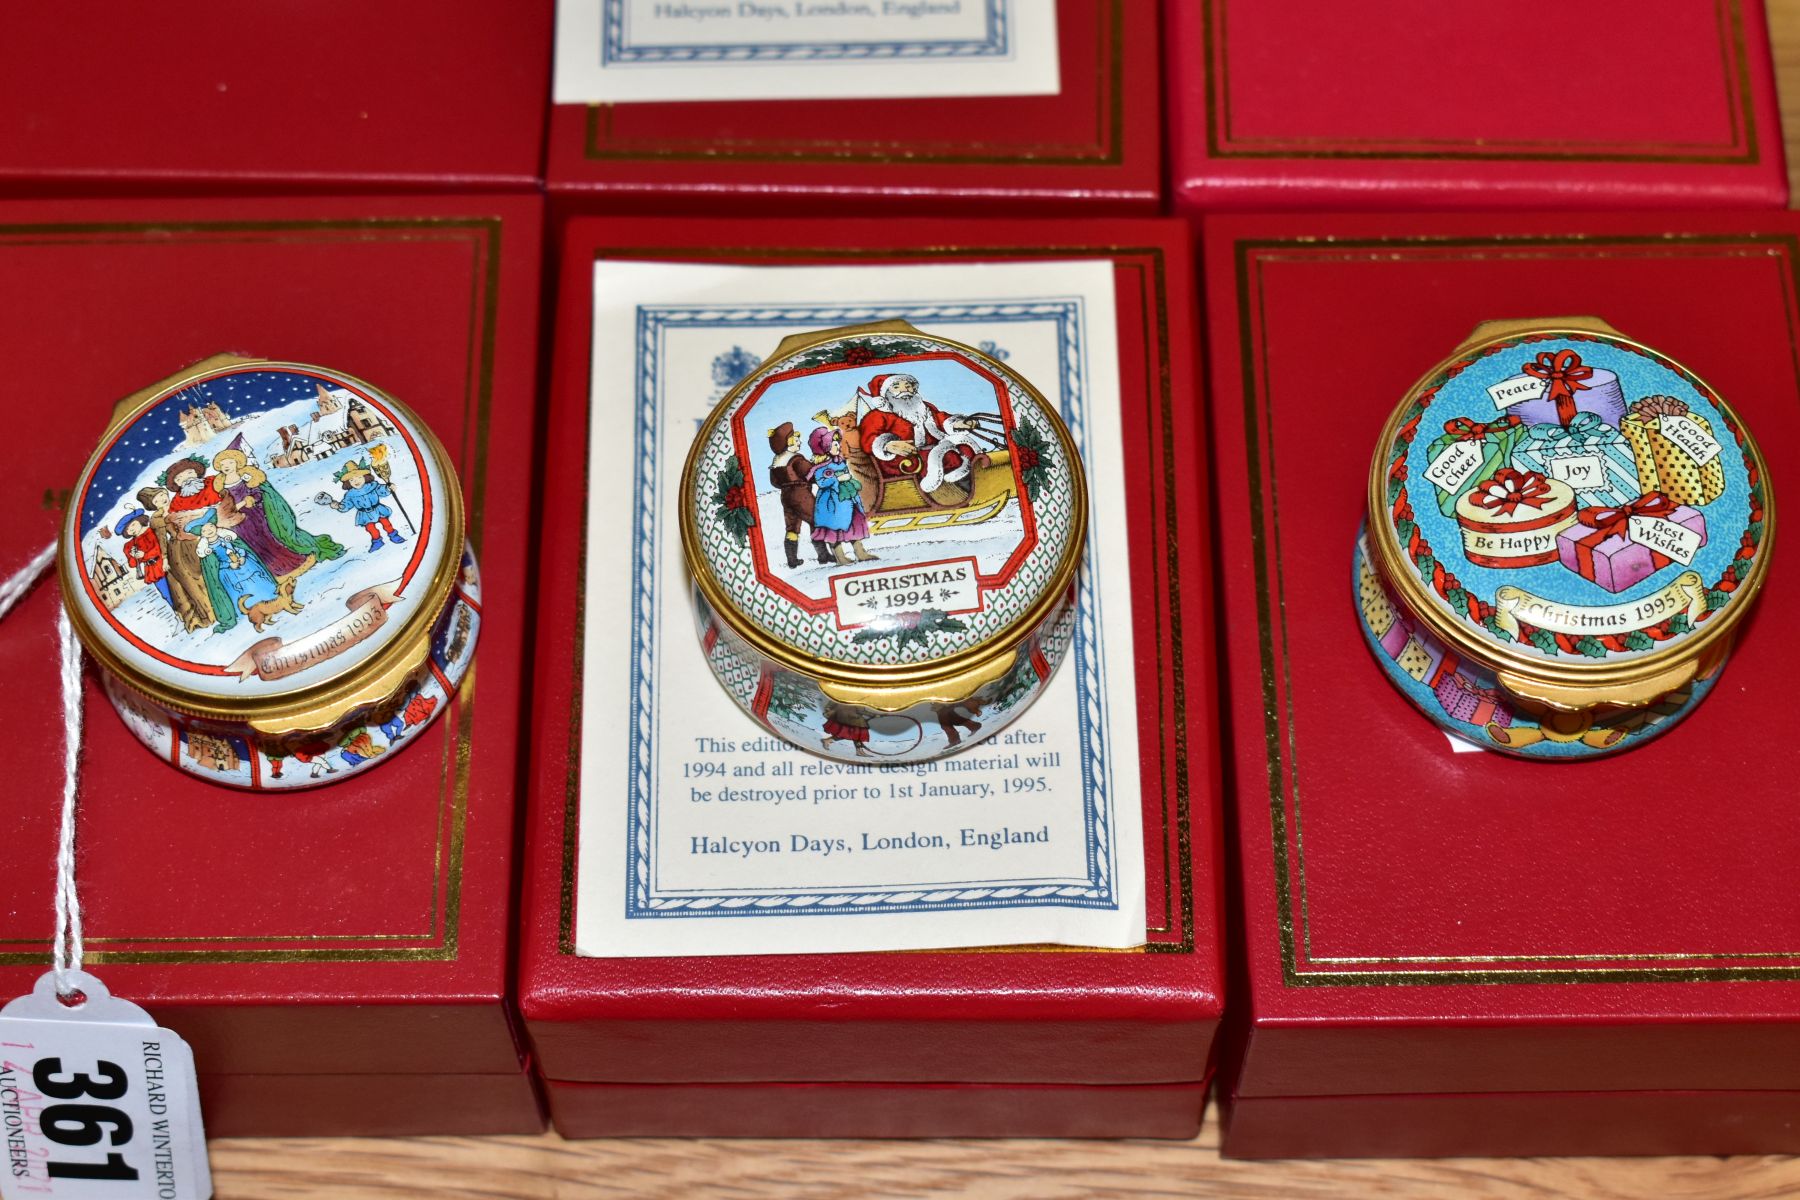 SEVEN BOXED HALCYON DAYS CHRISTMAS ENAMEL BOXES, 1993, 1994 with certificate, 1995, 1996, 1997 - Image 2 of 5